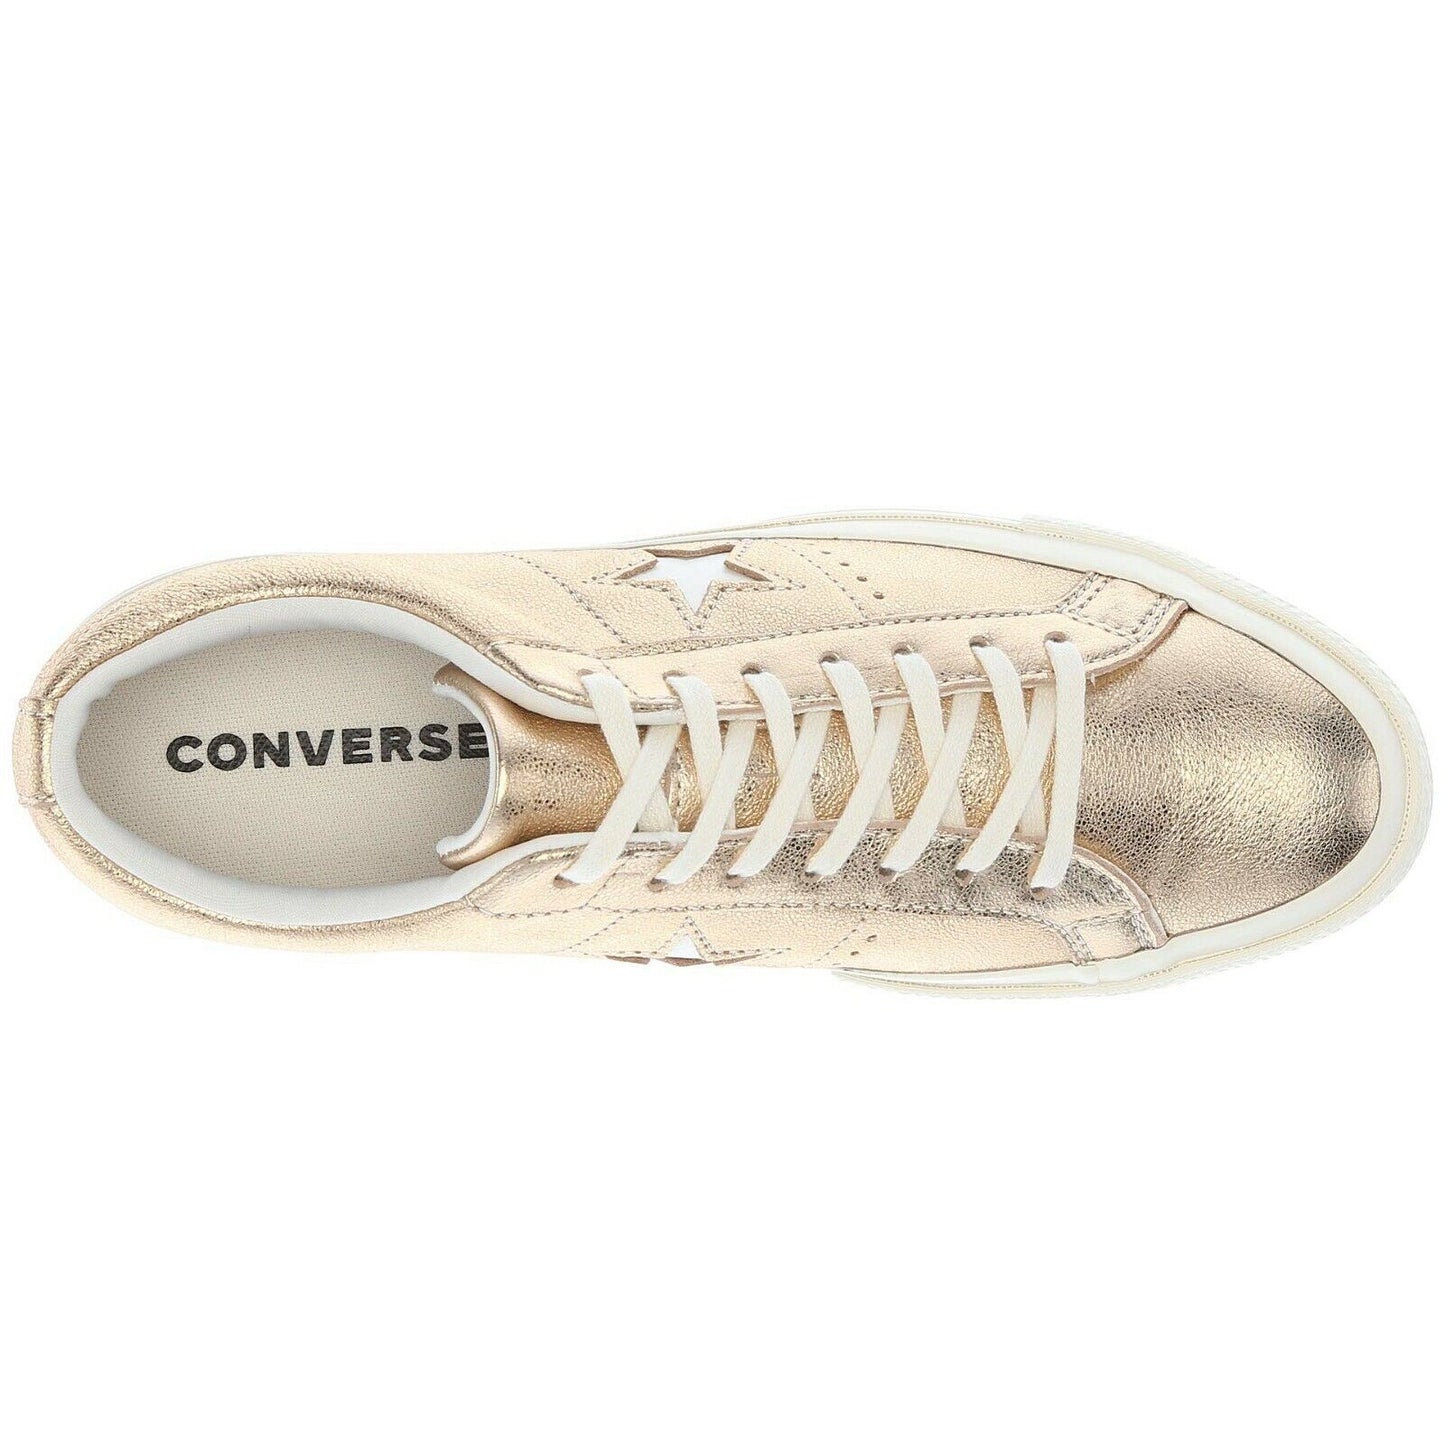 Converse Metallic Gold Leather One Star Oxford Runner Sneakers Size 9.5 NIB